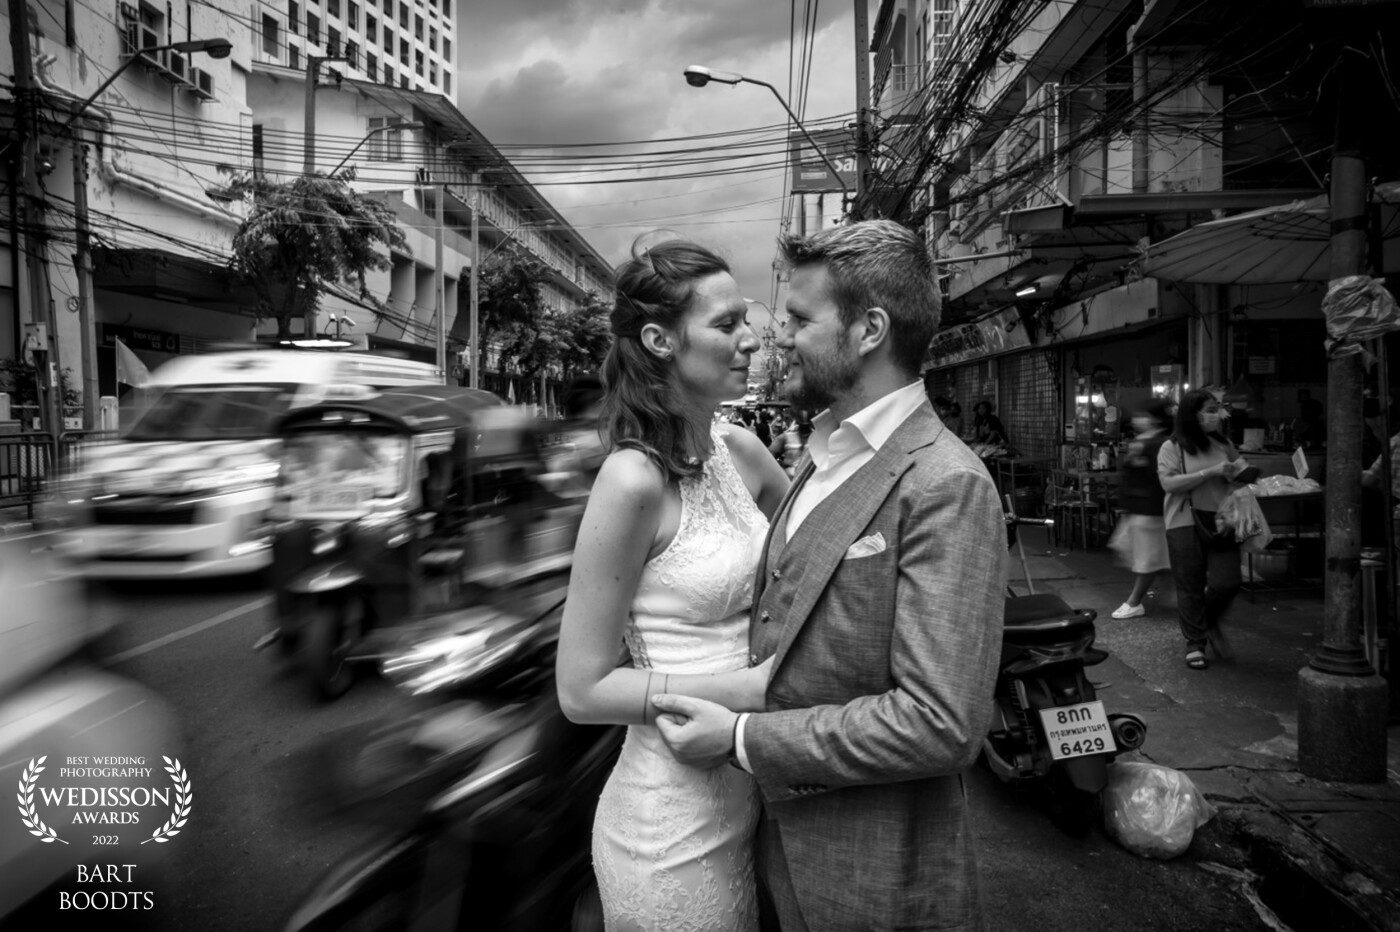 In the middle of Bangkok, we created this image just standing in the middle of the road. <br />
The busy life went on, while the couple enjoyed their love.